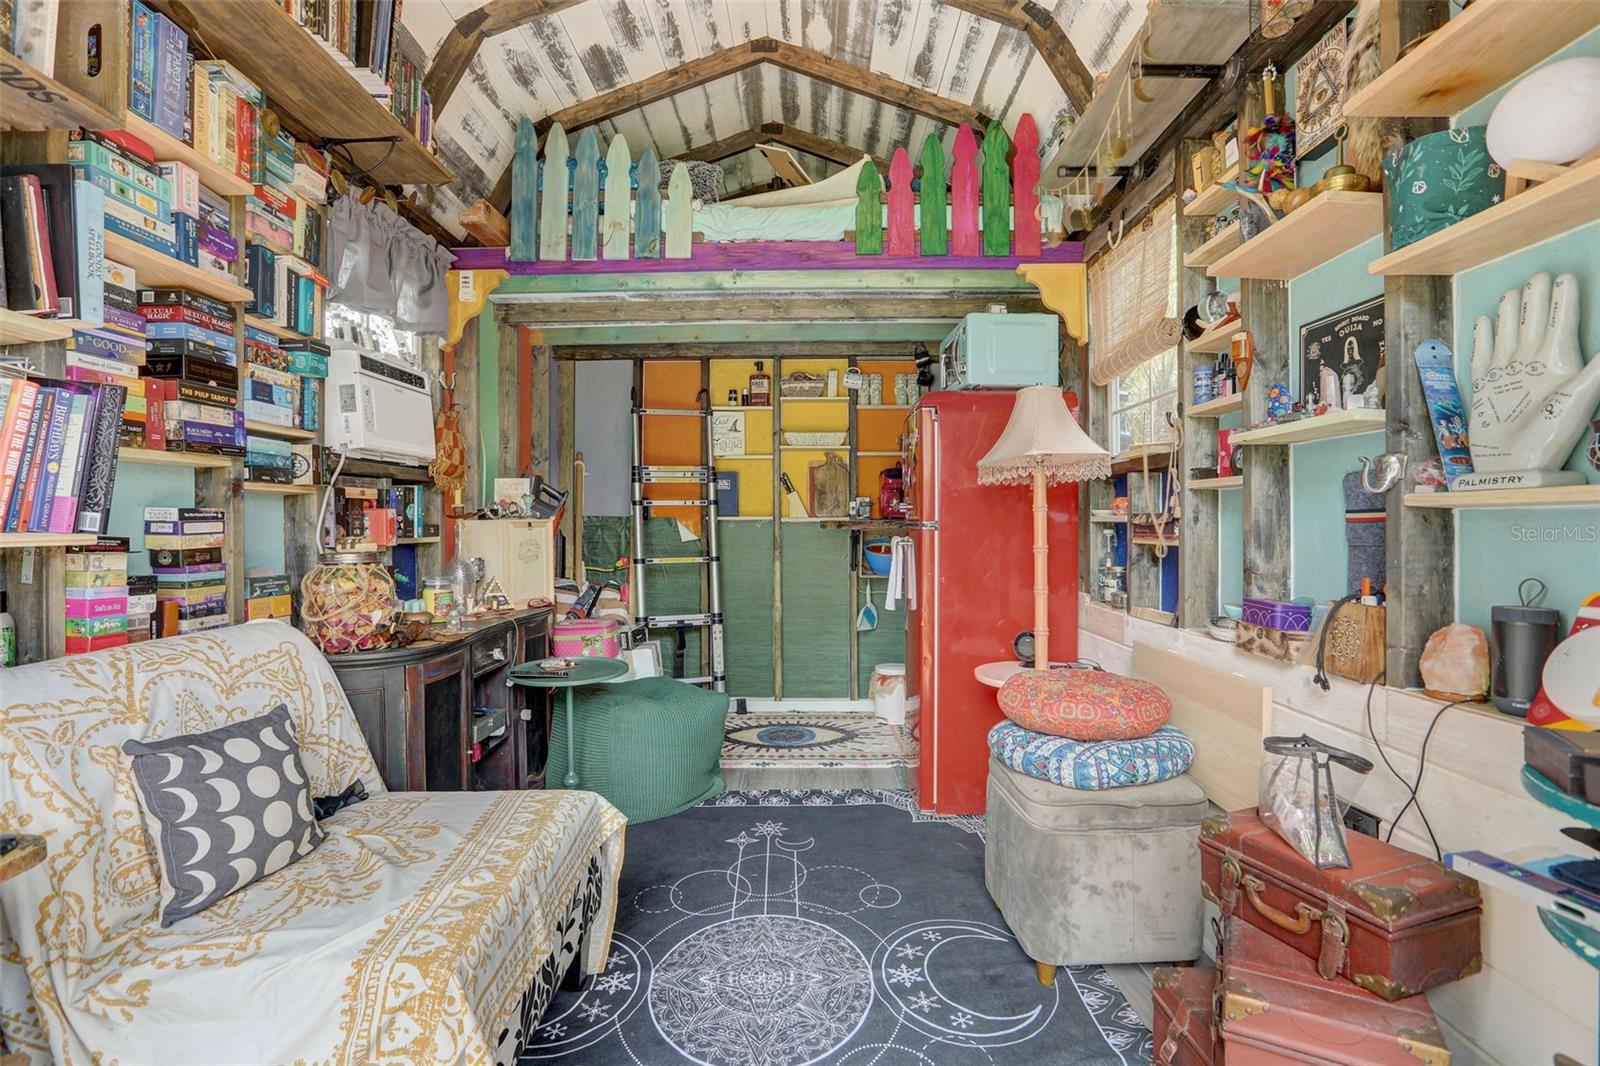 inside "SHE" shed with loft bed, electricity, and AC